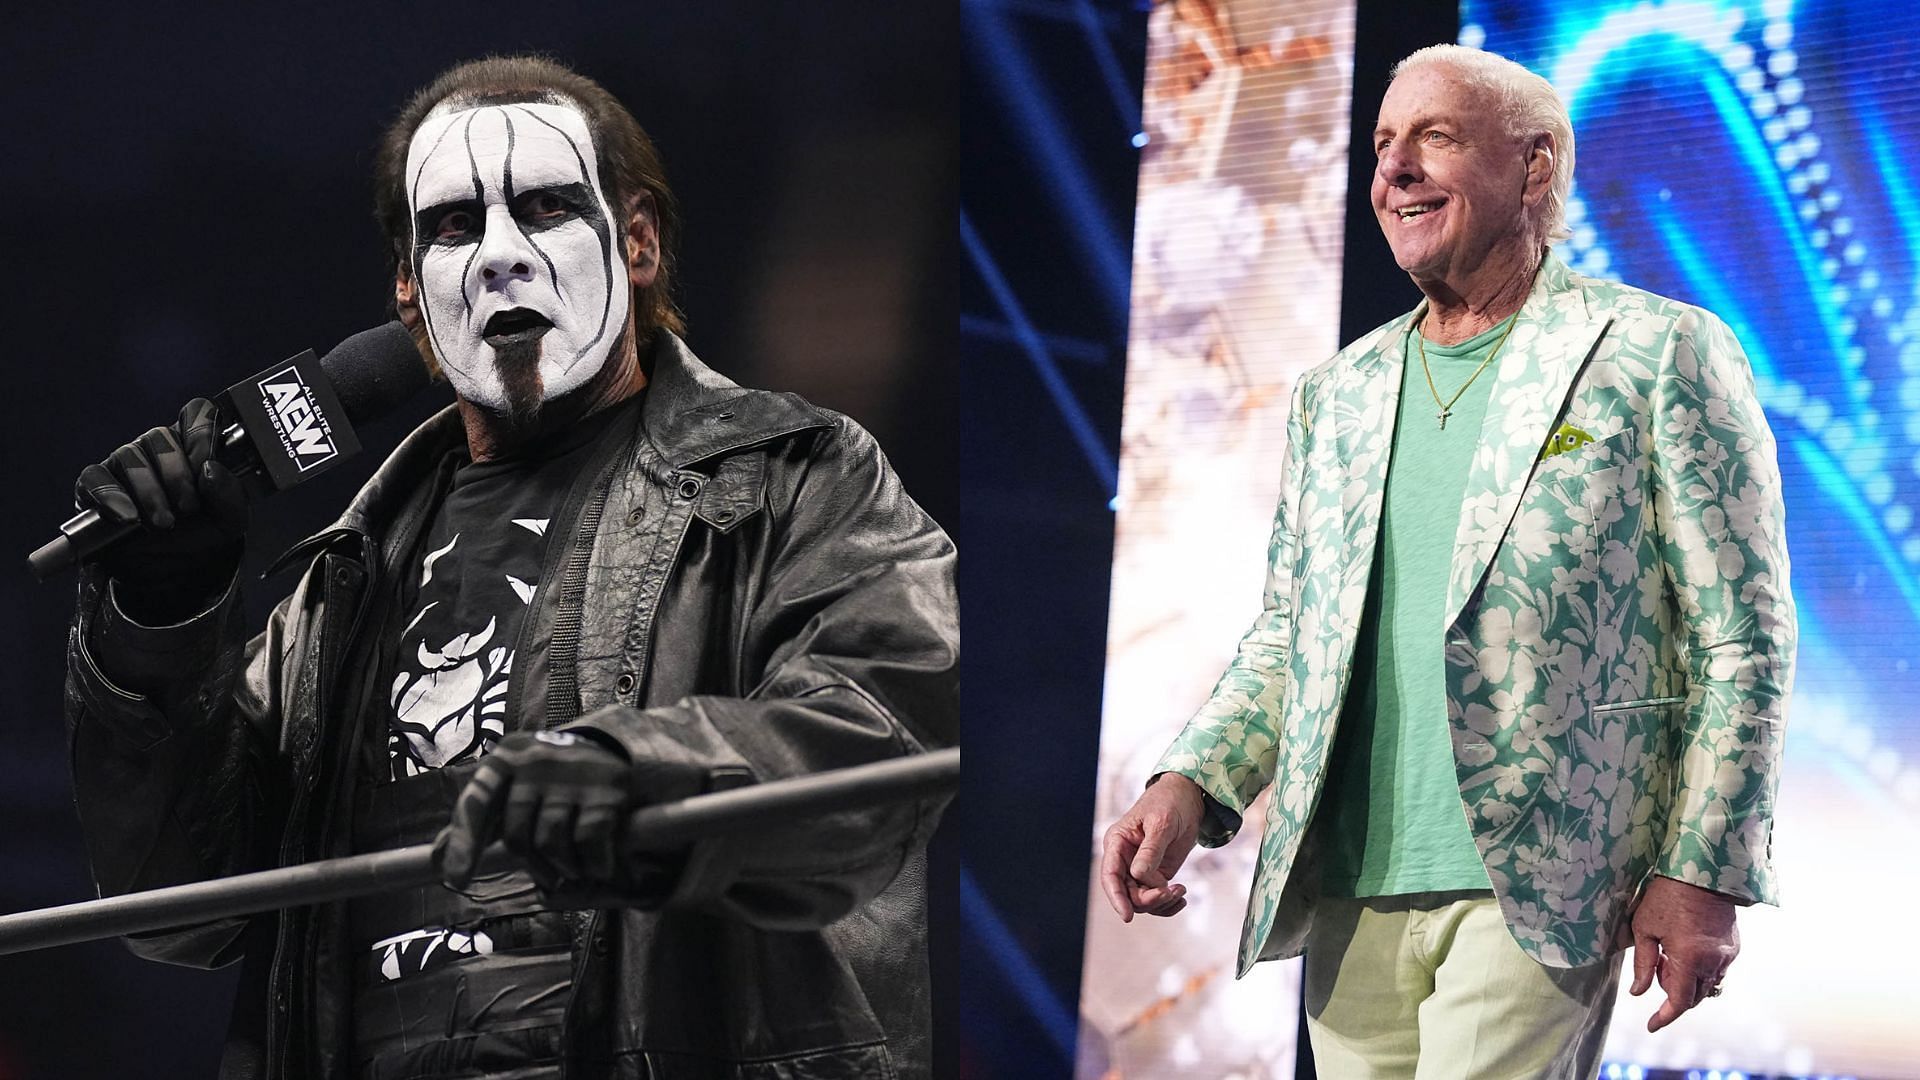 Ric Flair will stand by Sting